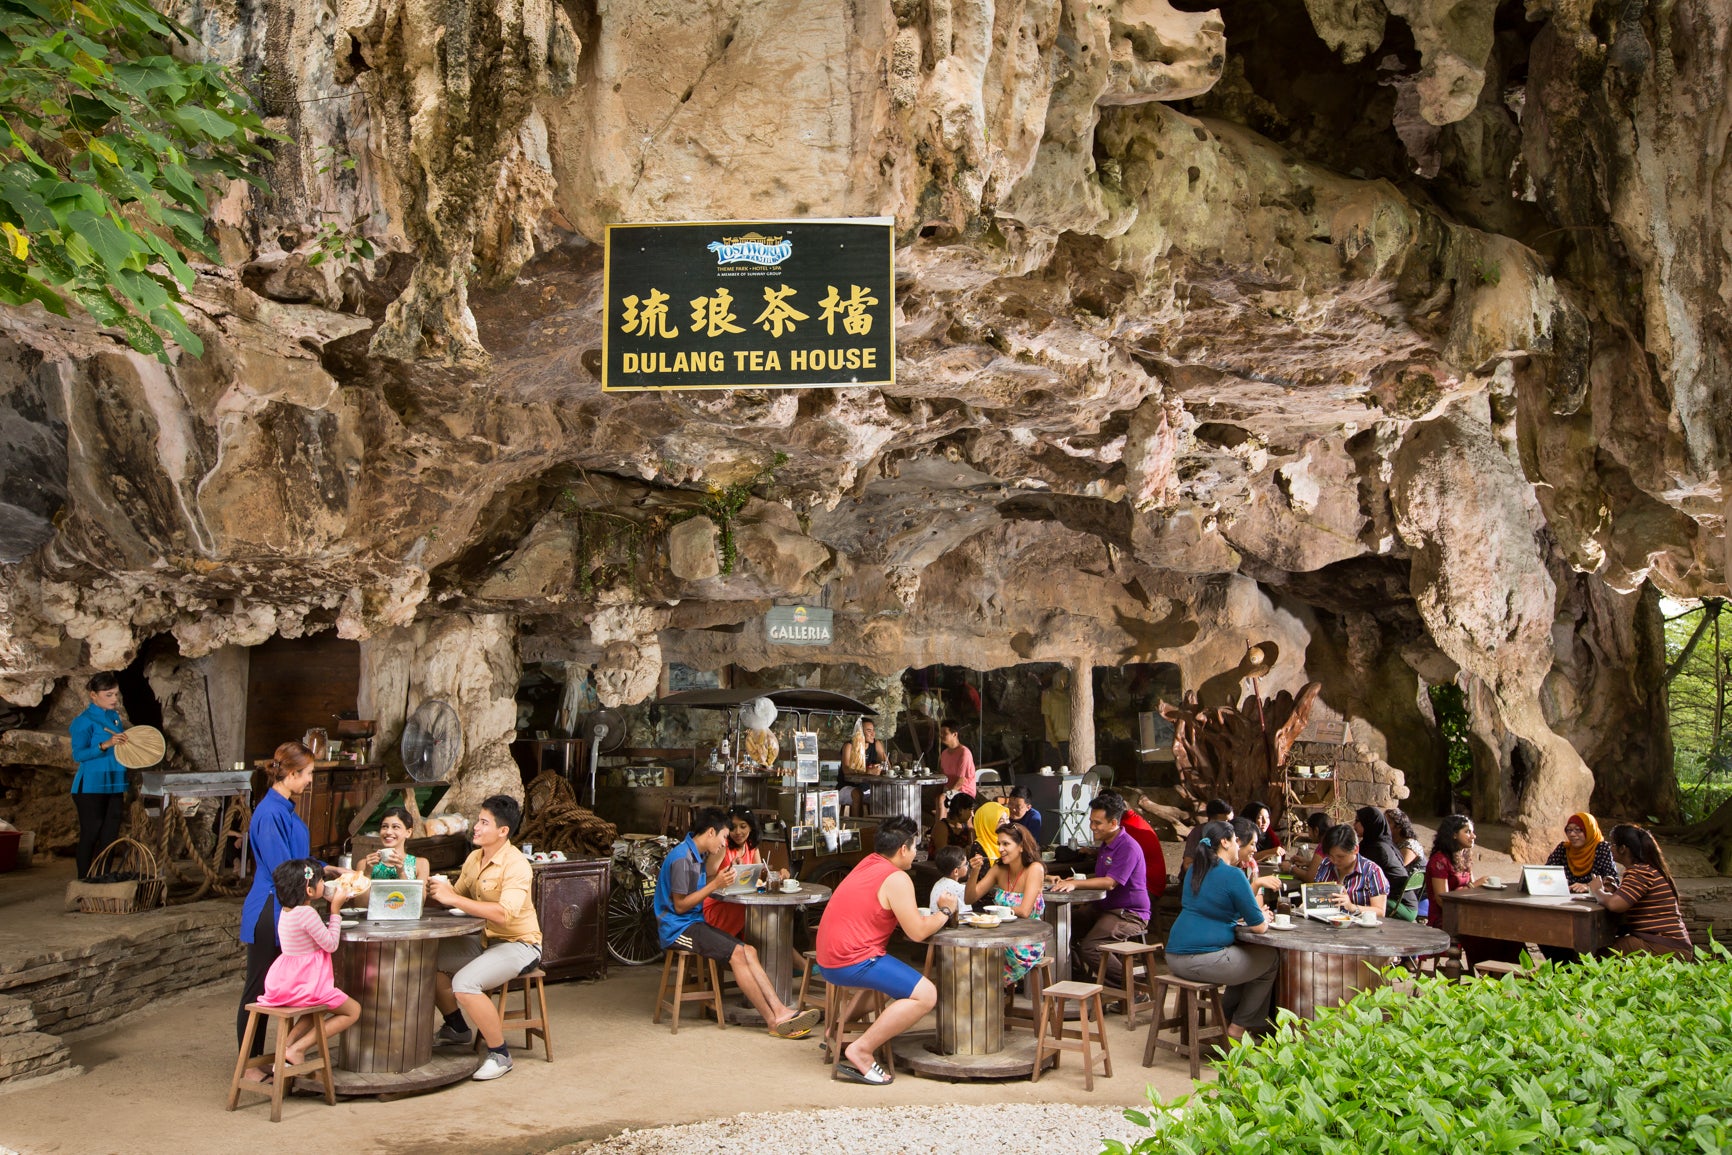 [Test] No Plans This Year-End? Here's Something M'sians HAVE to Check Out at Lost World of Tambun! - WORLD OF BUZZ 2